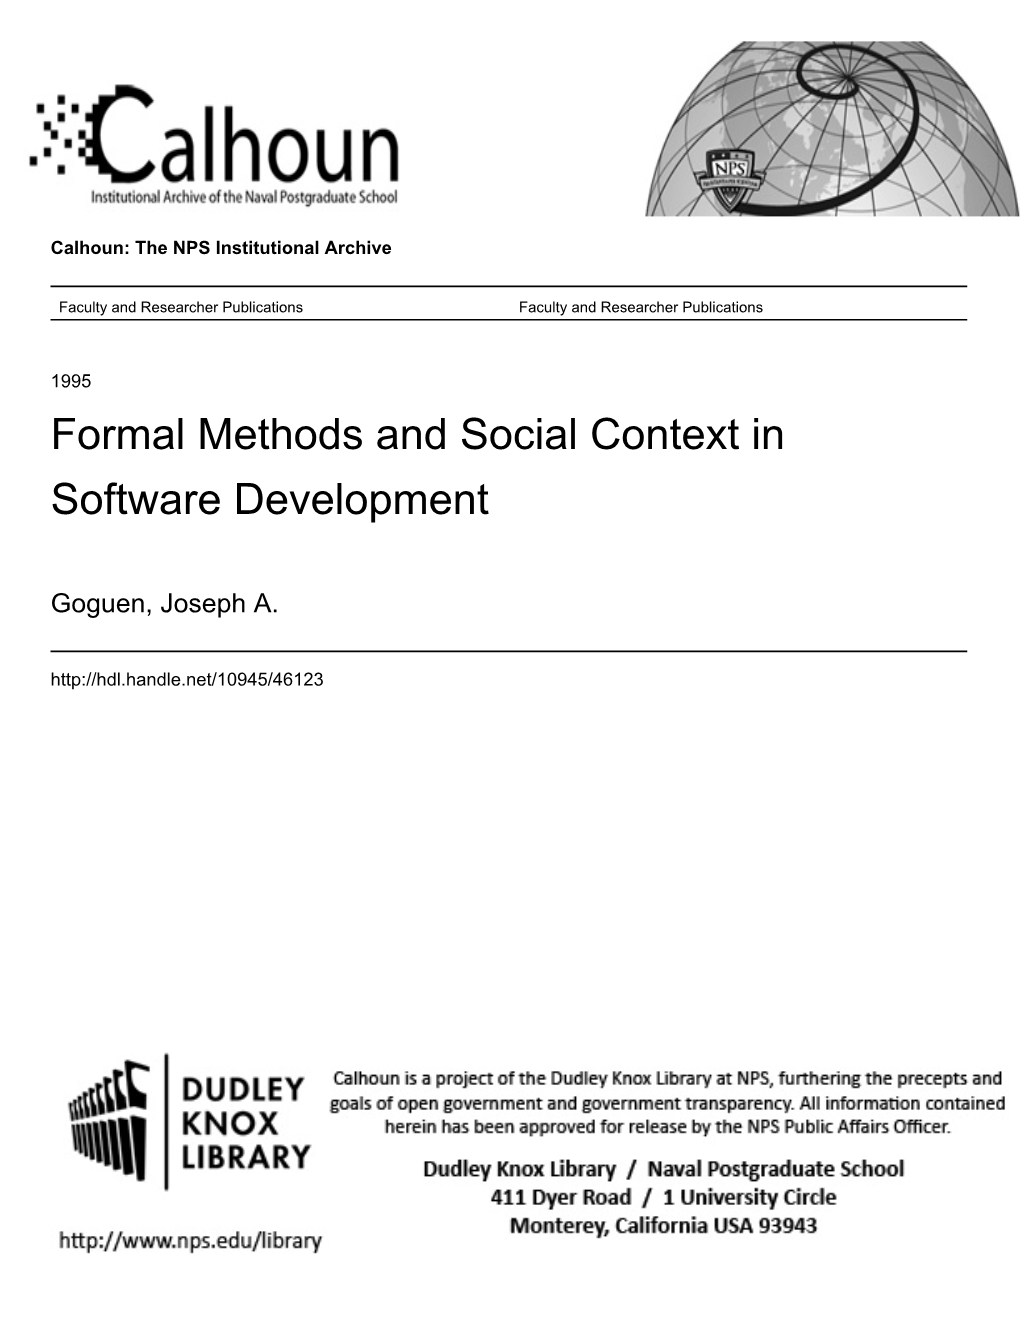 Formal Methods and Social Context in Software Development